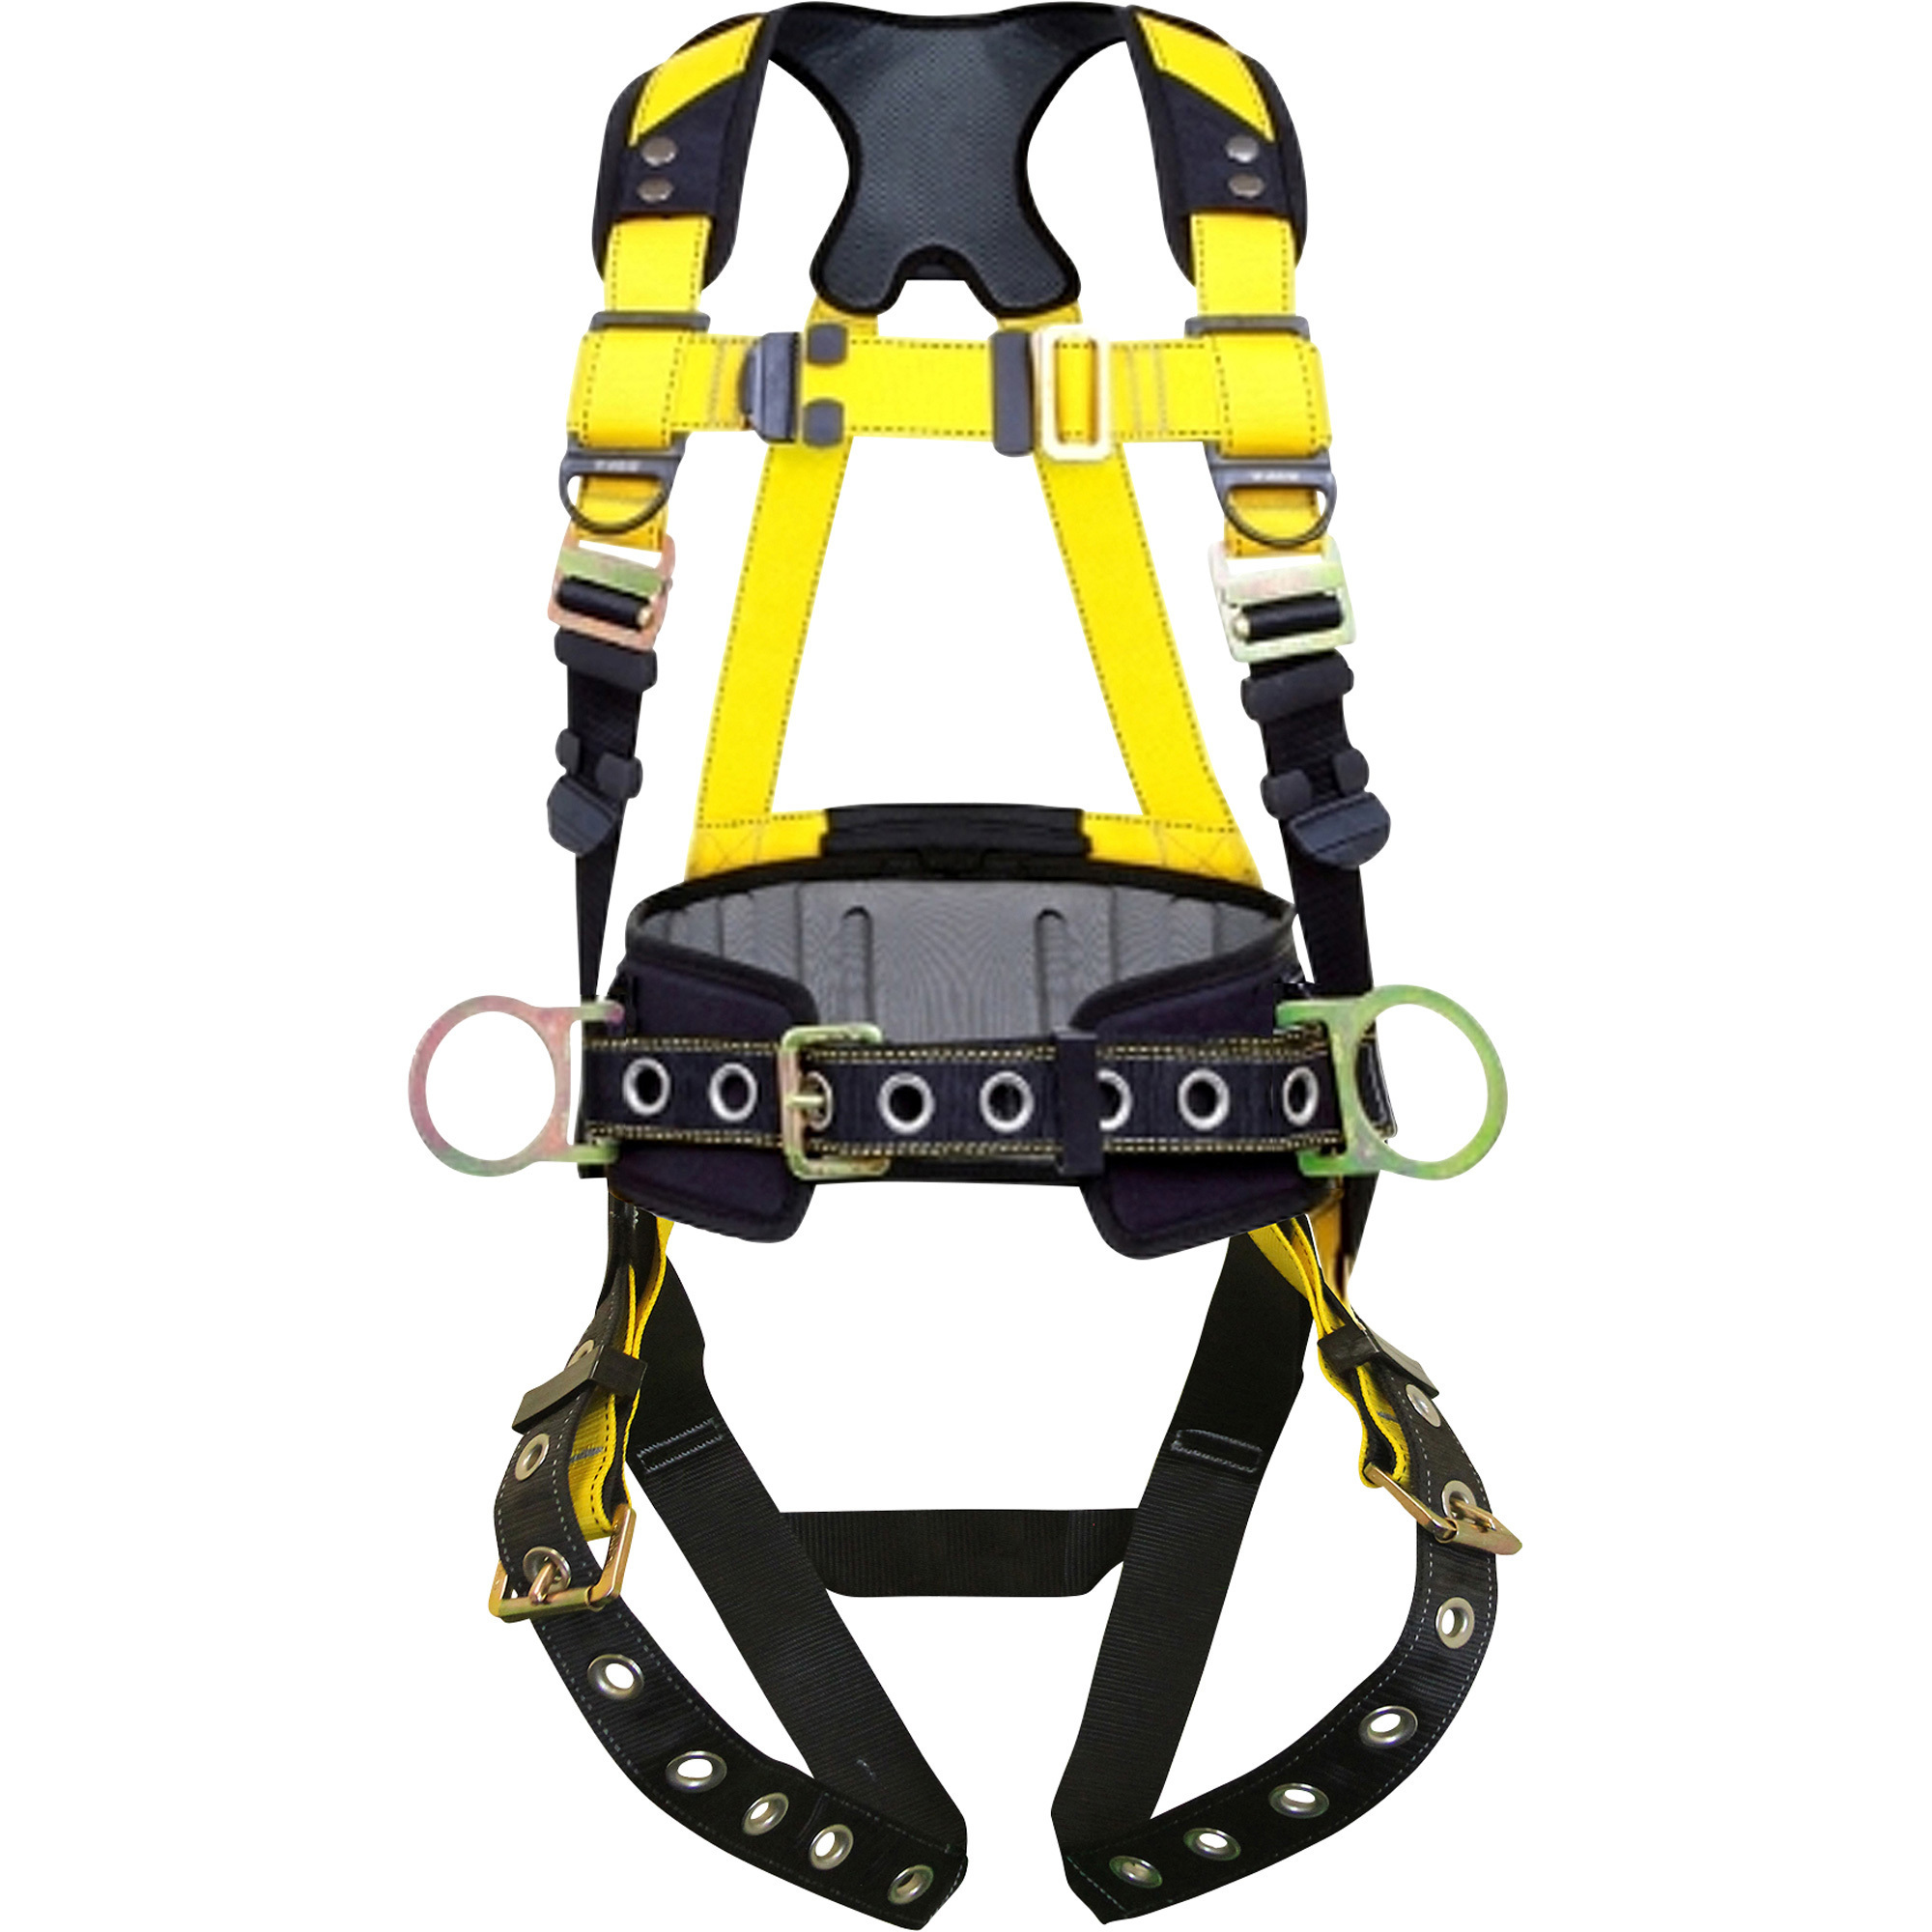 Guardian Fall Protection Series 3 Full Body Safety Harness with Waist Pad, Medium/Large, Model 37193S